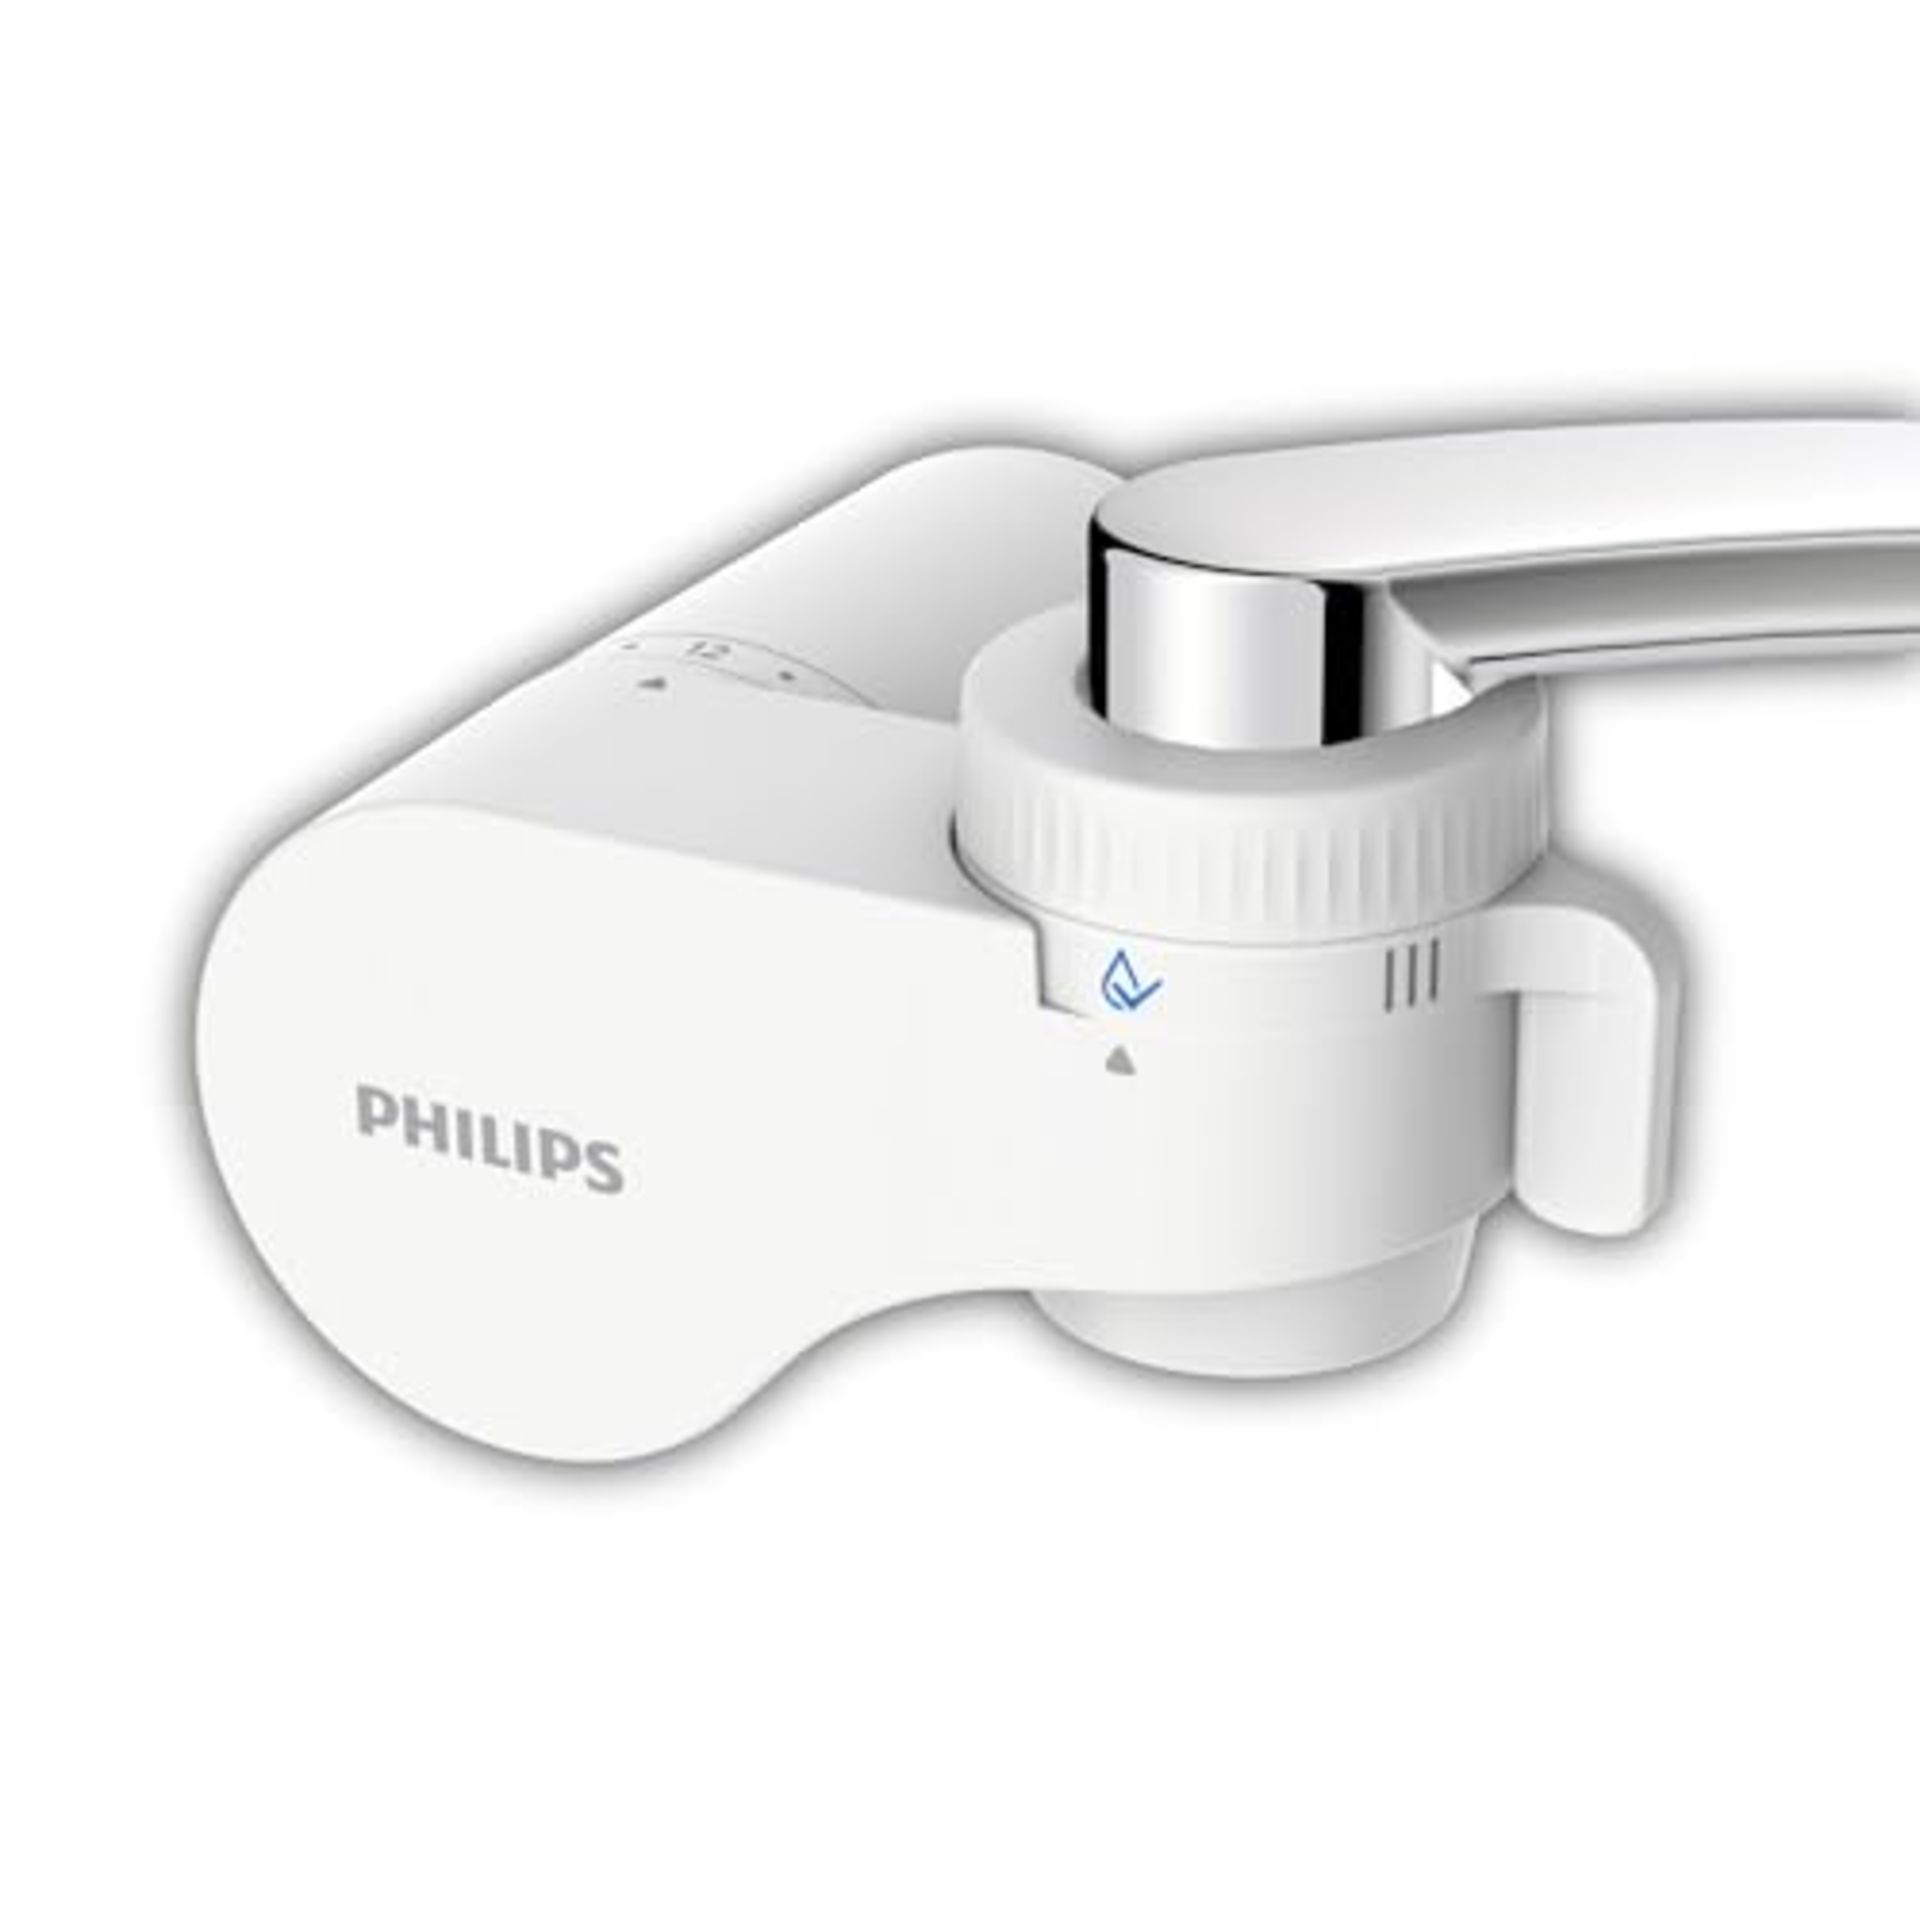 Philips AWP3754 X-Guard On Tap Water Filter, Drinking Water Filter for Taps, Ultrafilt